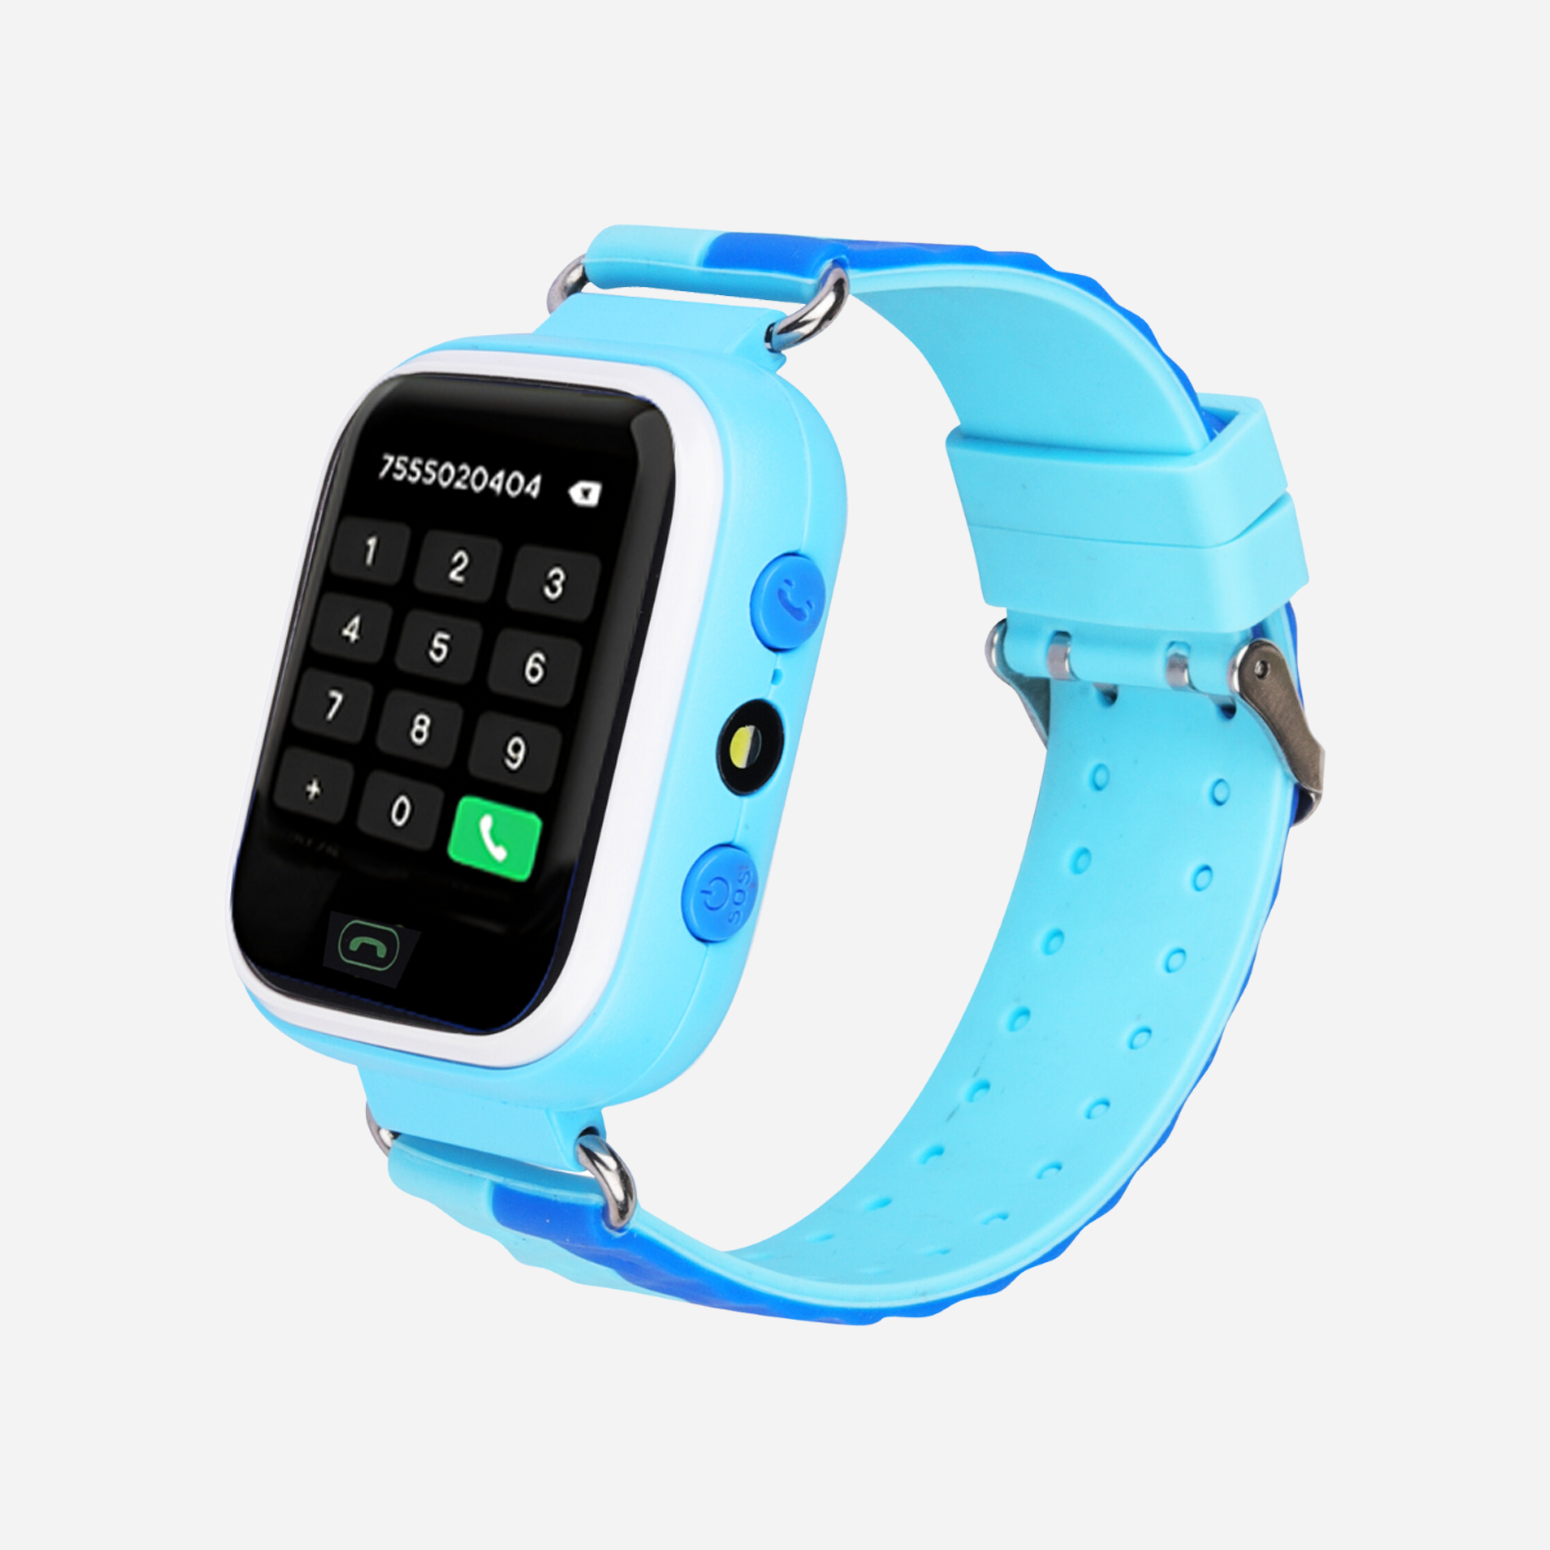 sekyo-lunar-location-tracking-agps-lbs-voice-call-voice-massages-camera-touch-screen-lbs-smartwatch-for-kids